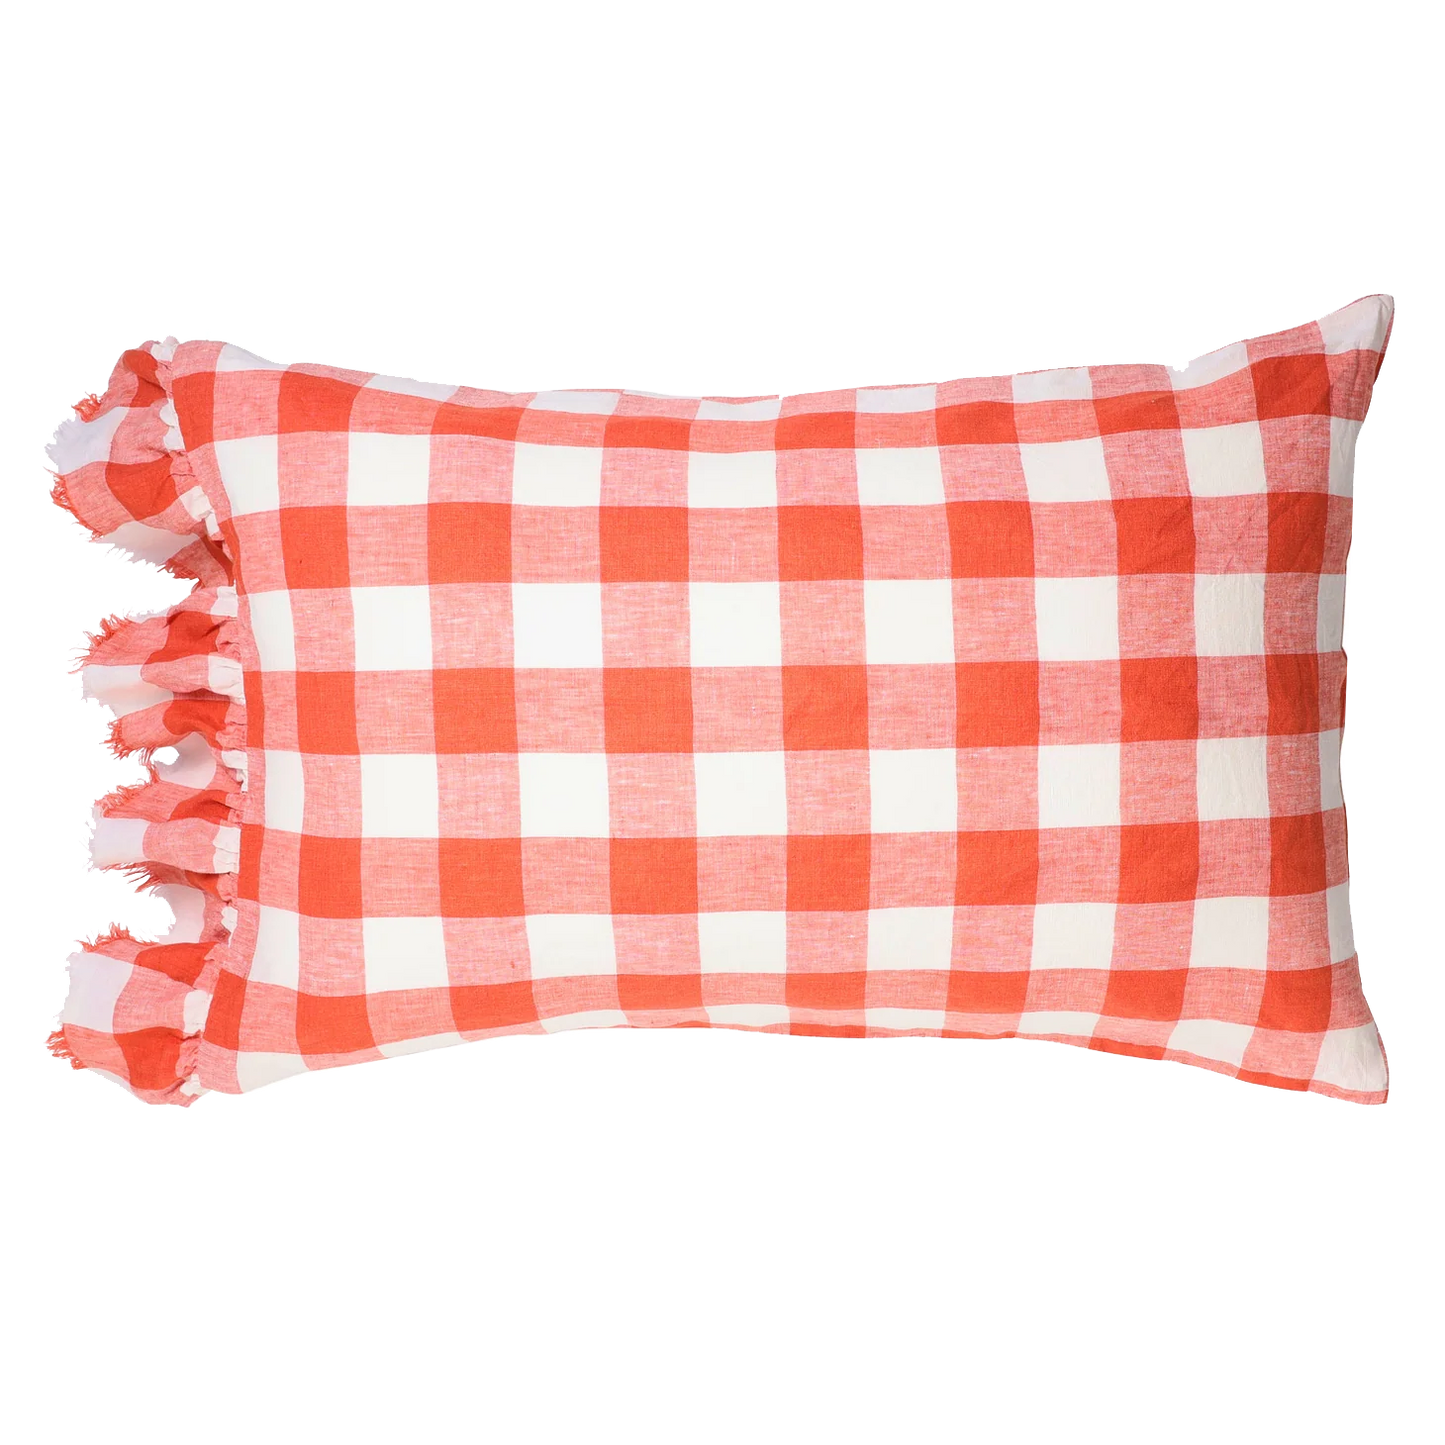 SOW cherry gingham pillowcase set with ruffle